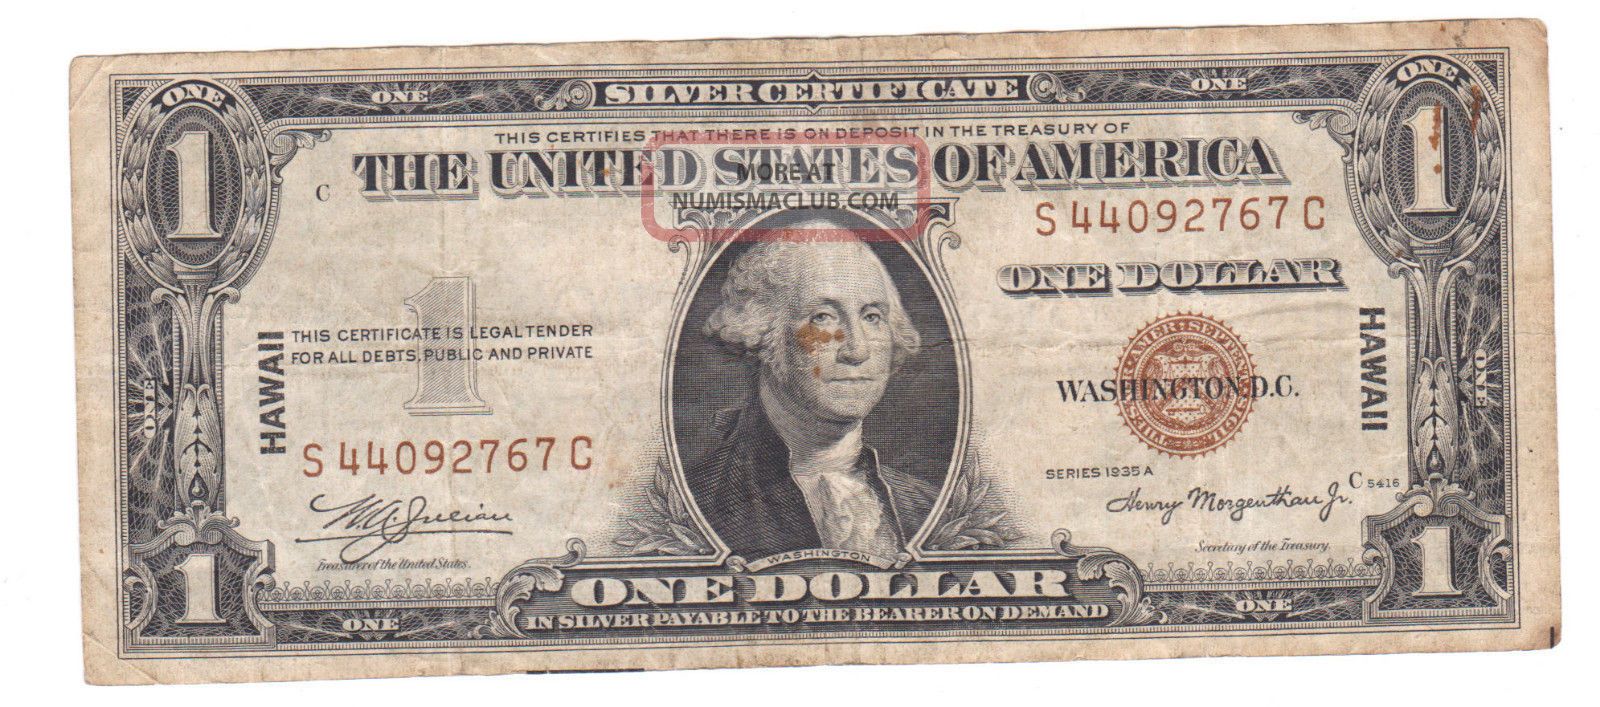 United States Silver Certificate $1 Hawaii Banknote 1935a Red Seal